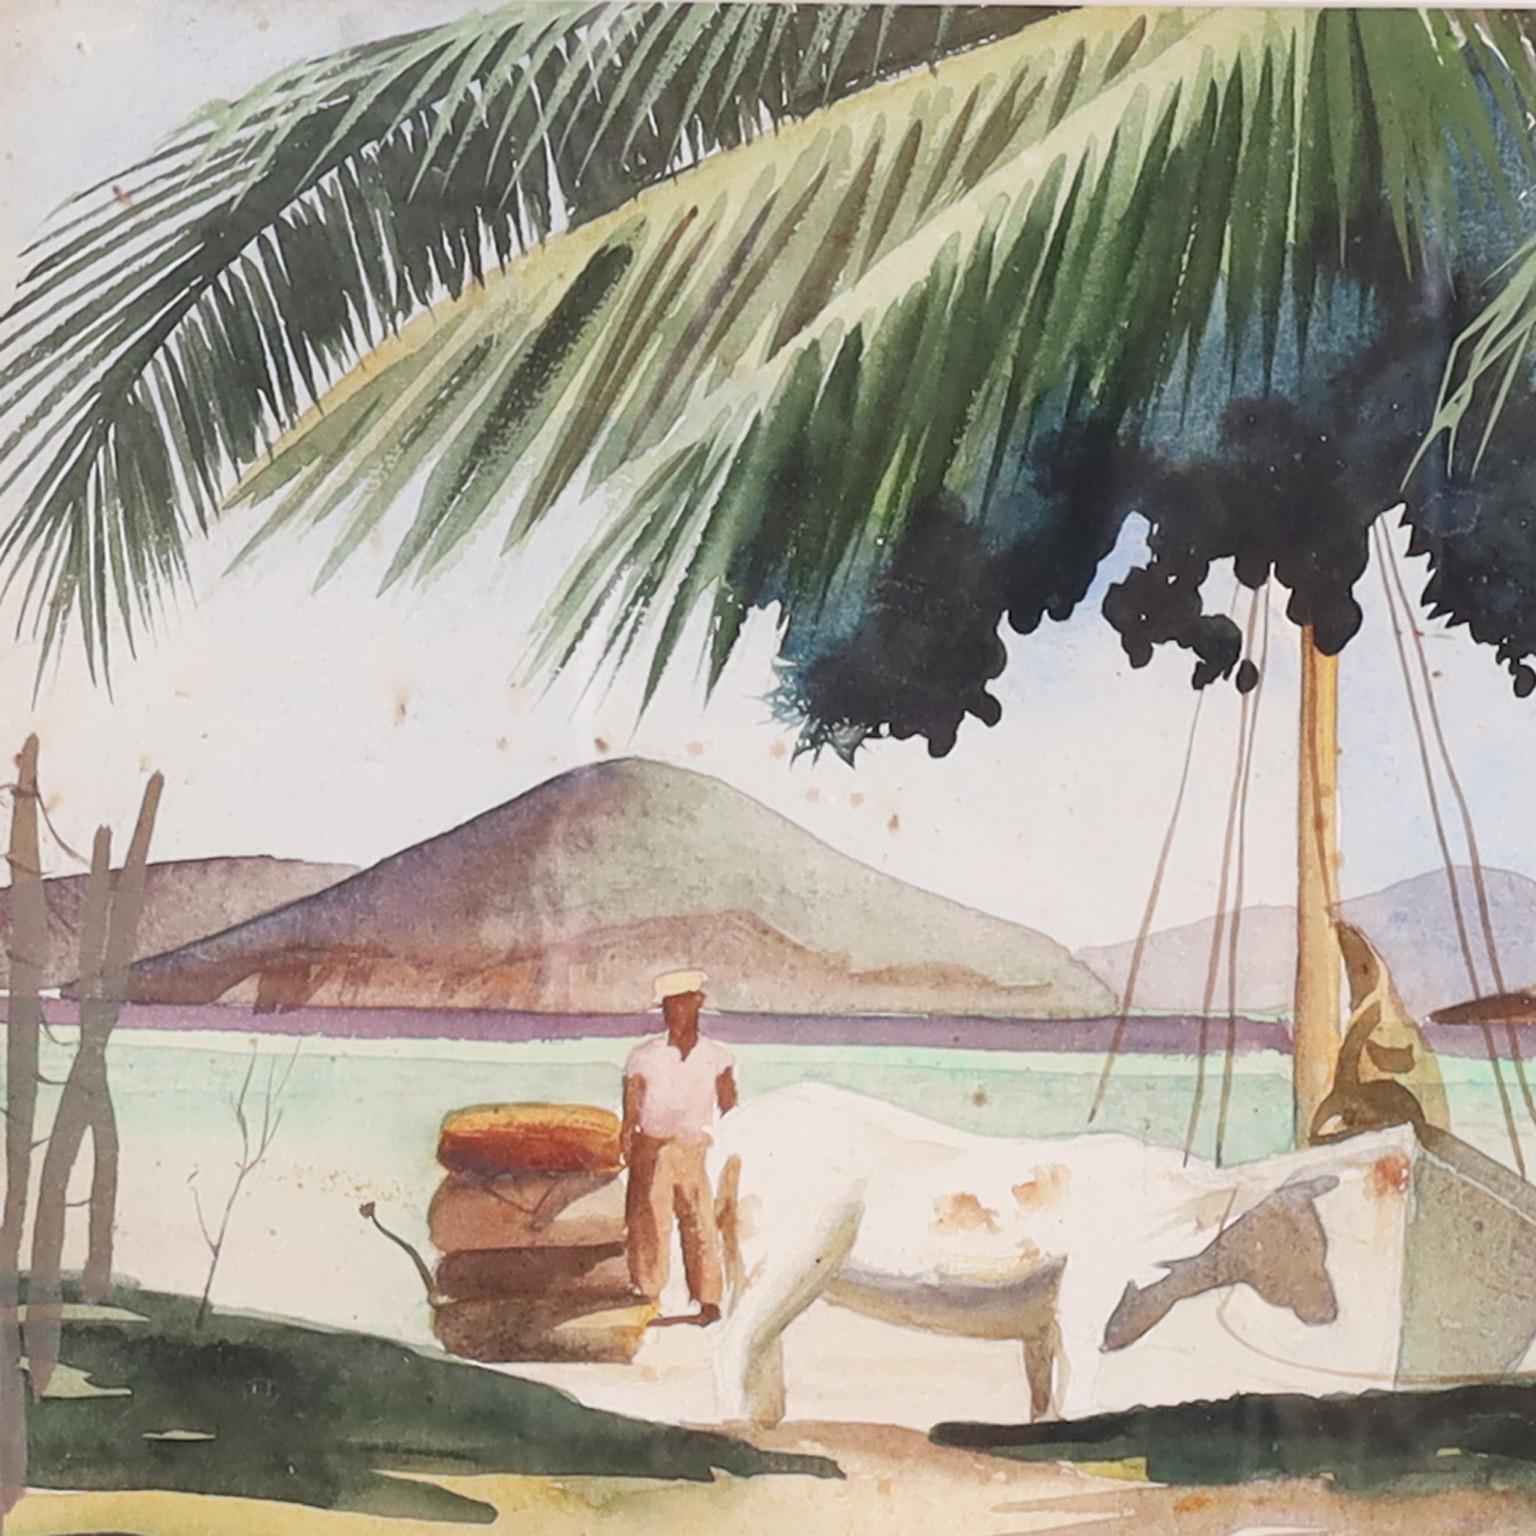 Inviting tropical watercolor on paper of a coastal scene with figures, a cow, and a boat all bathed in sunlight on an afternoon in the Virgin Islands. Signed in the lower left by noted American artist Mitchell Jamieson whose work can be seen in